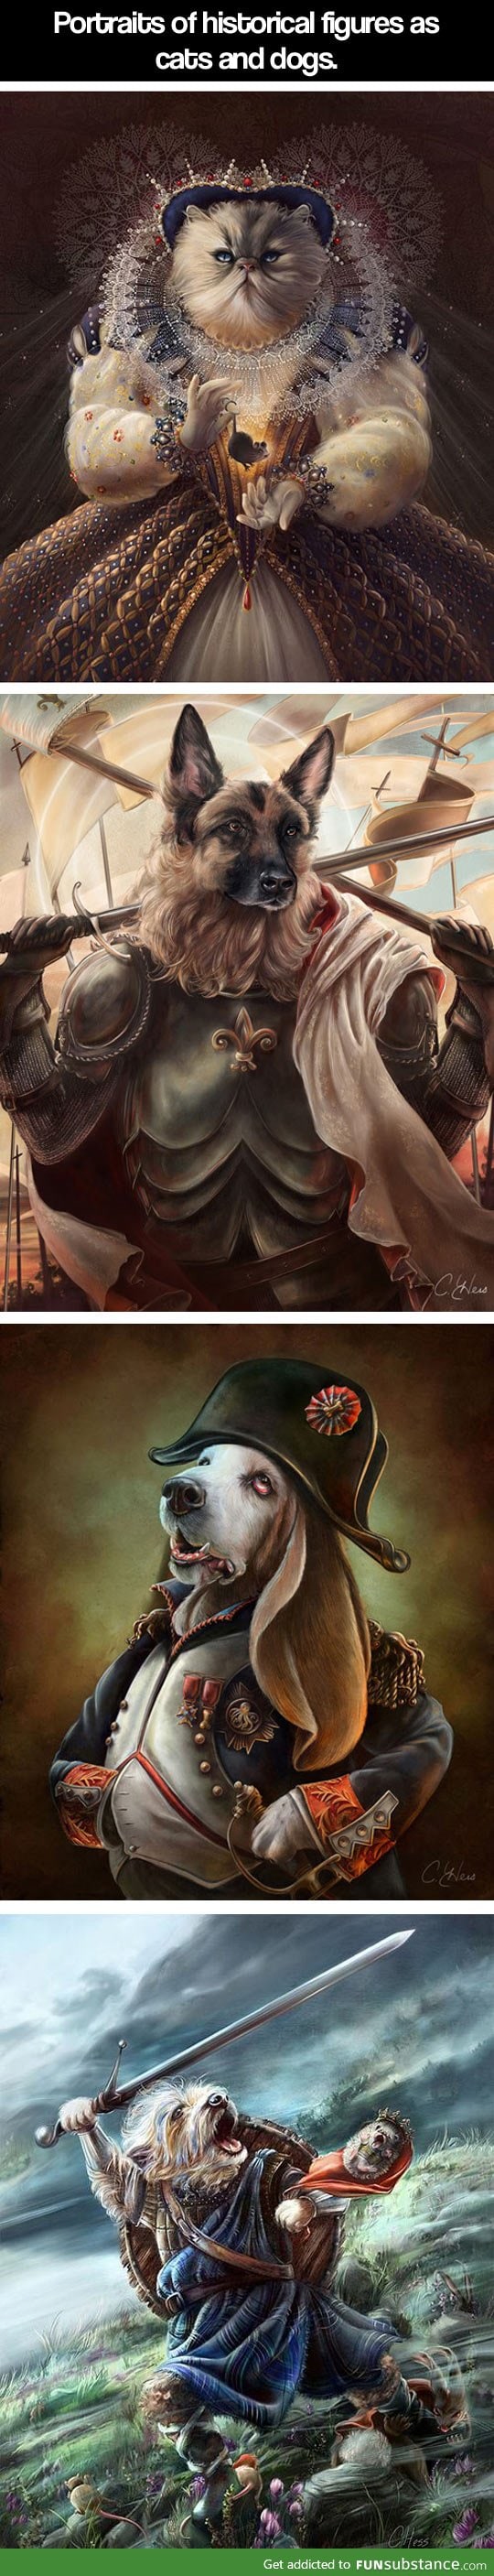 Historical figures as cats and dogs